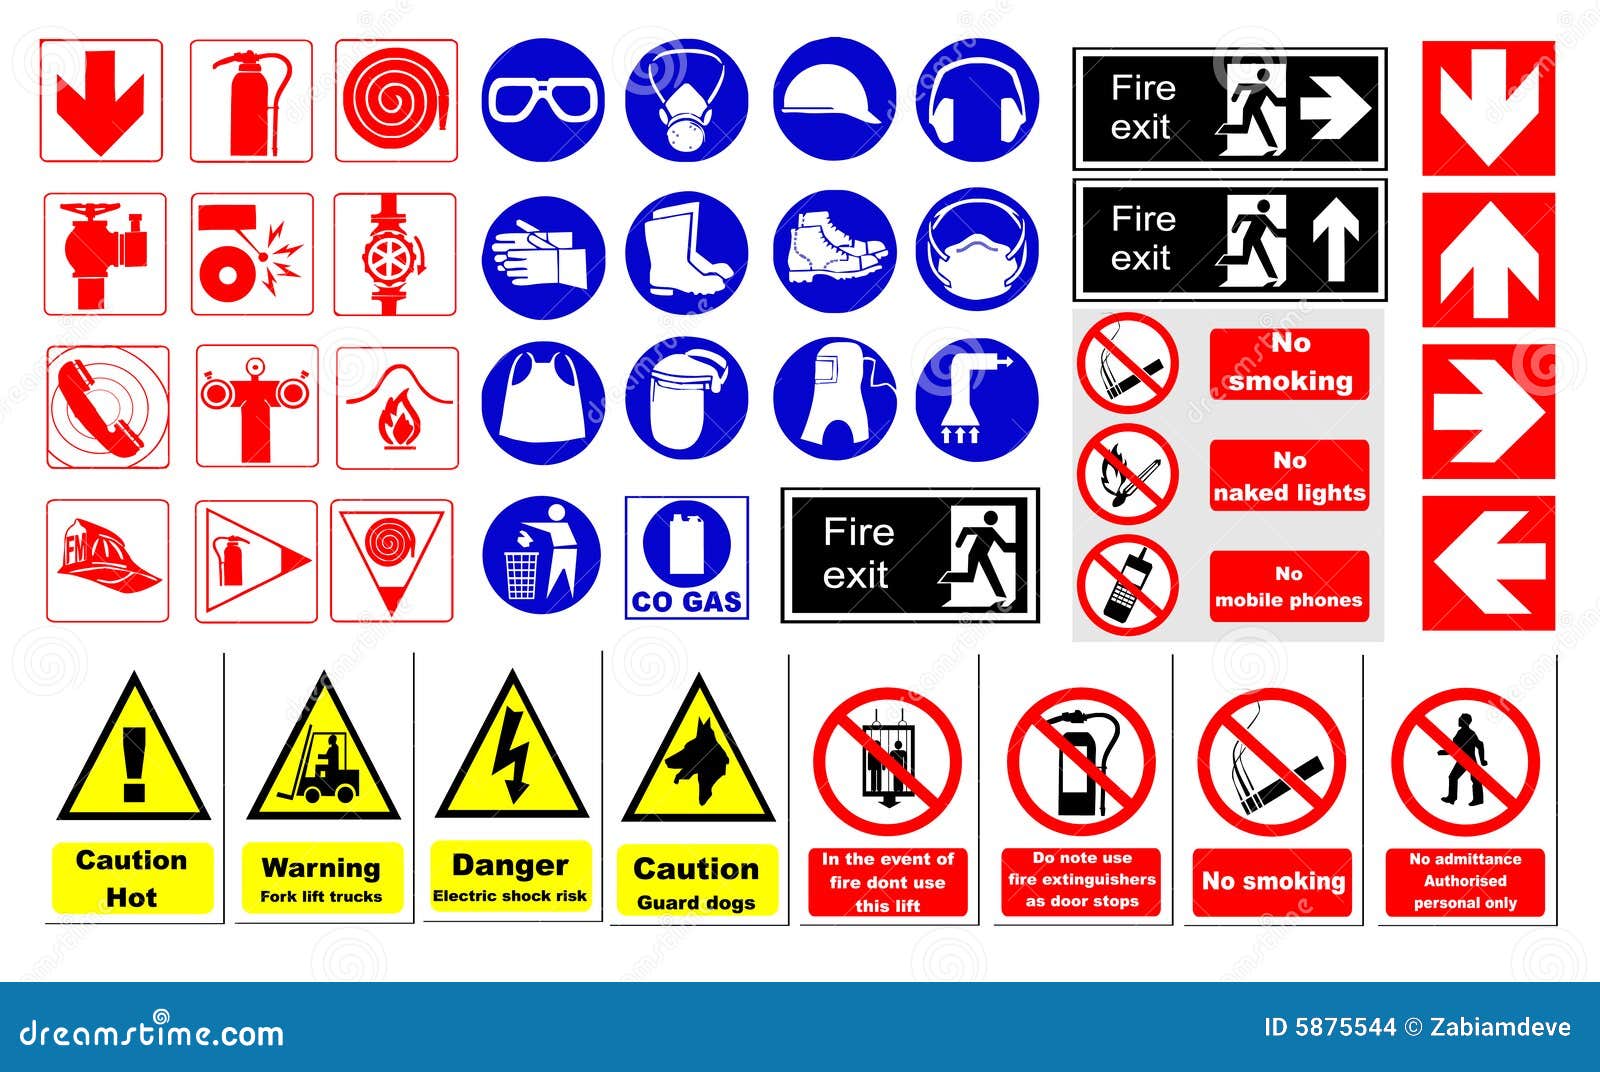 Safety signs vector illustration on white background.